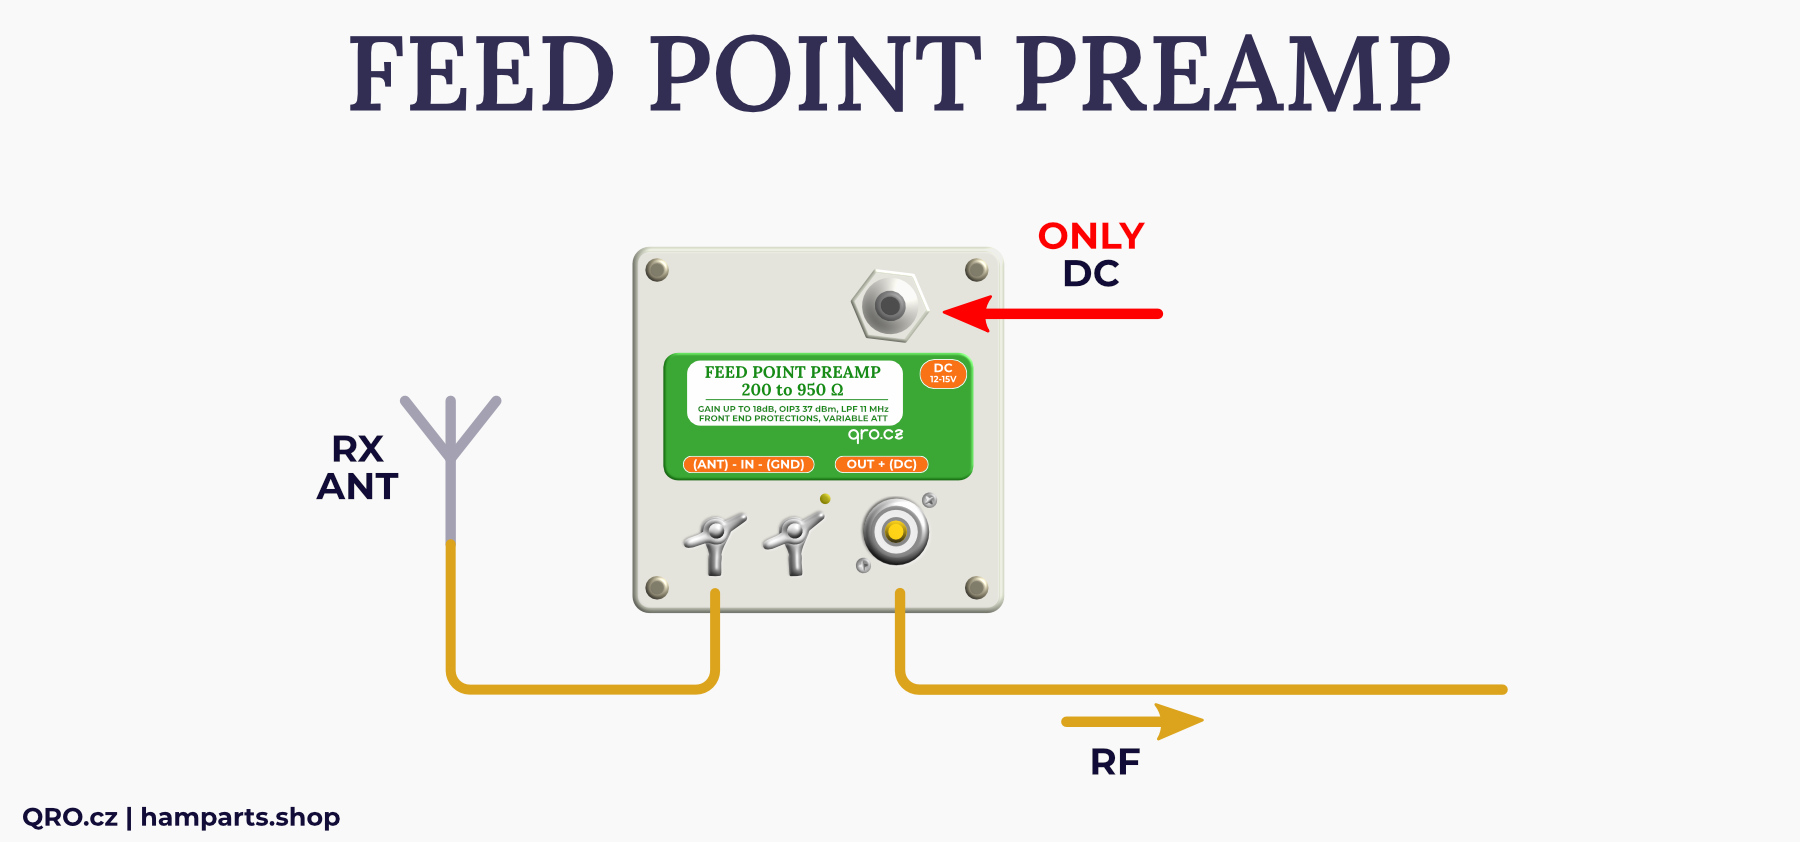 rx feed point preamplifier by qro.cz hamparts.shop